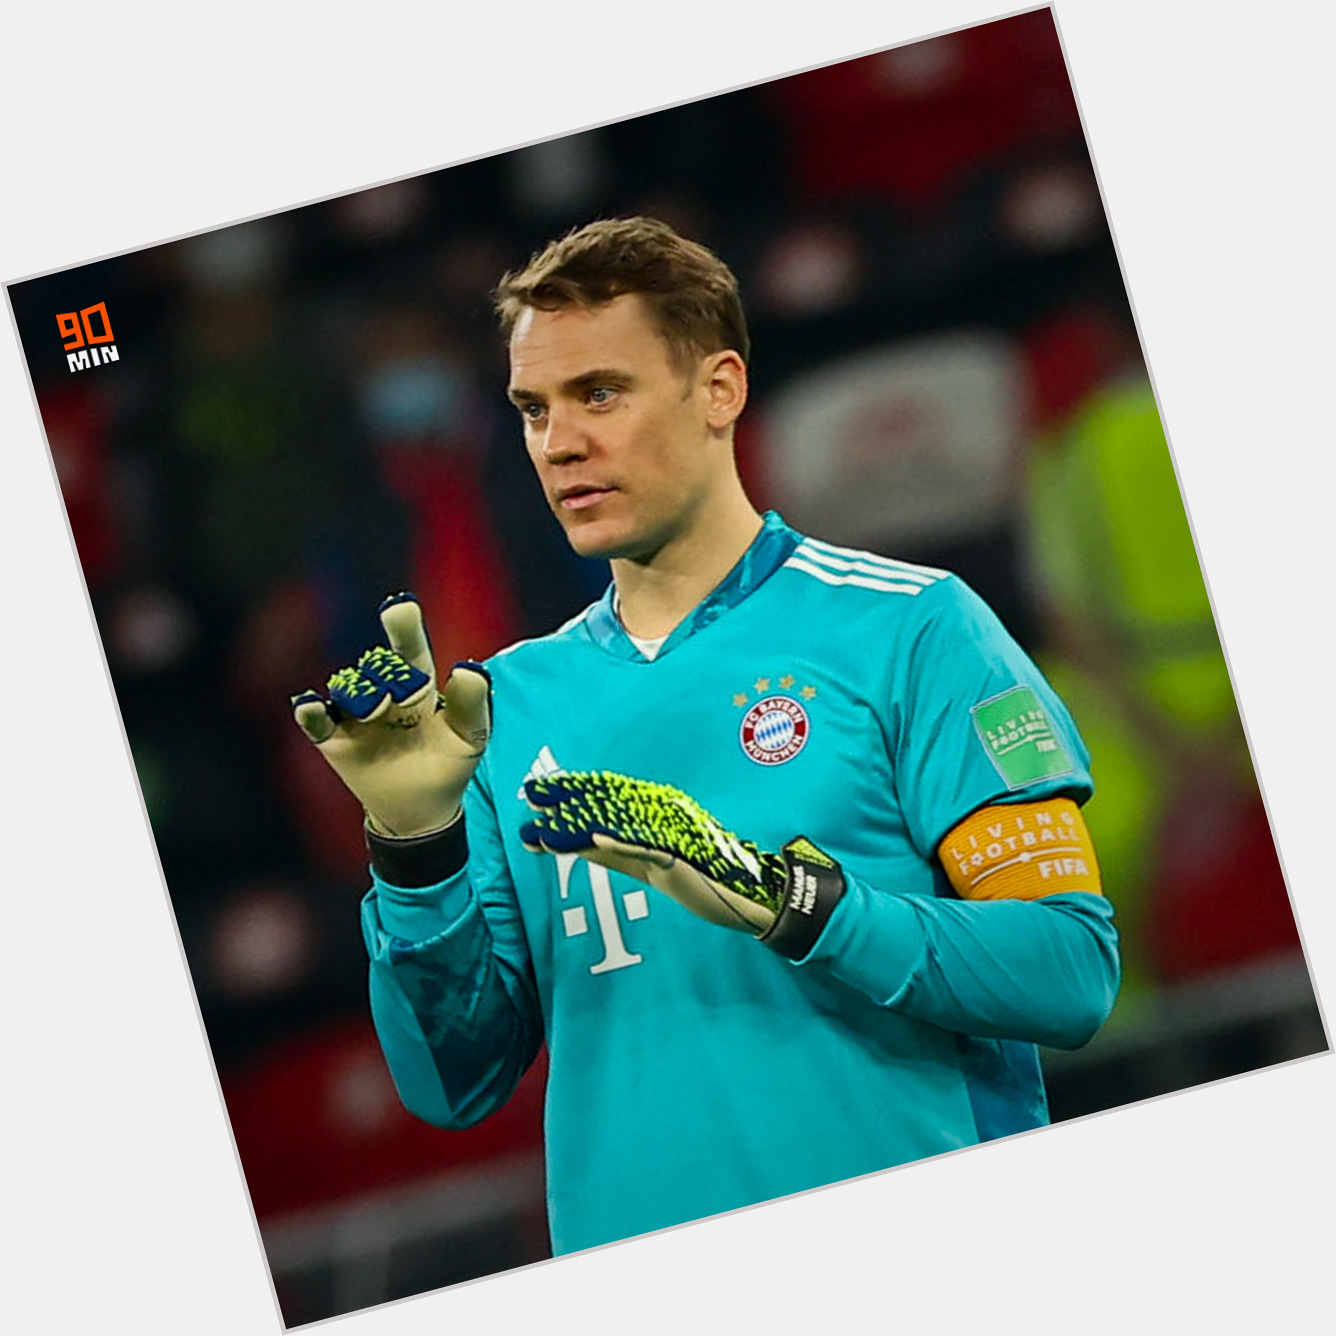 Manuel Neuer is 35 today! Happy Birthday to one of (if not the) greatest goalkeeper of all time! 